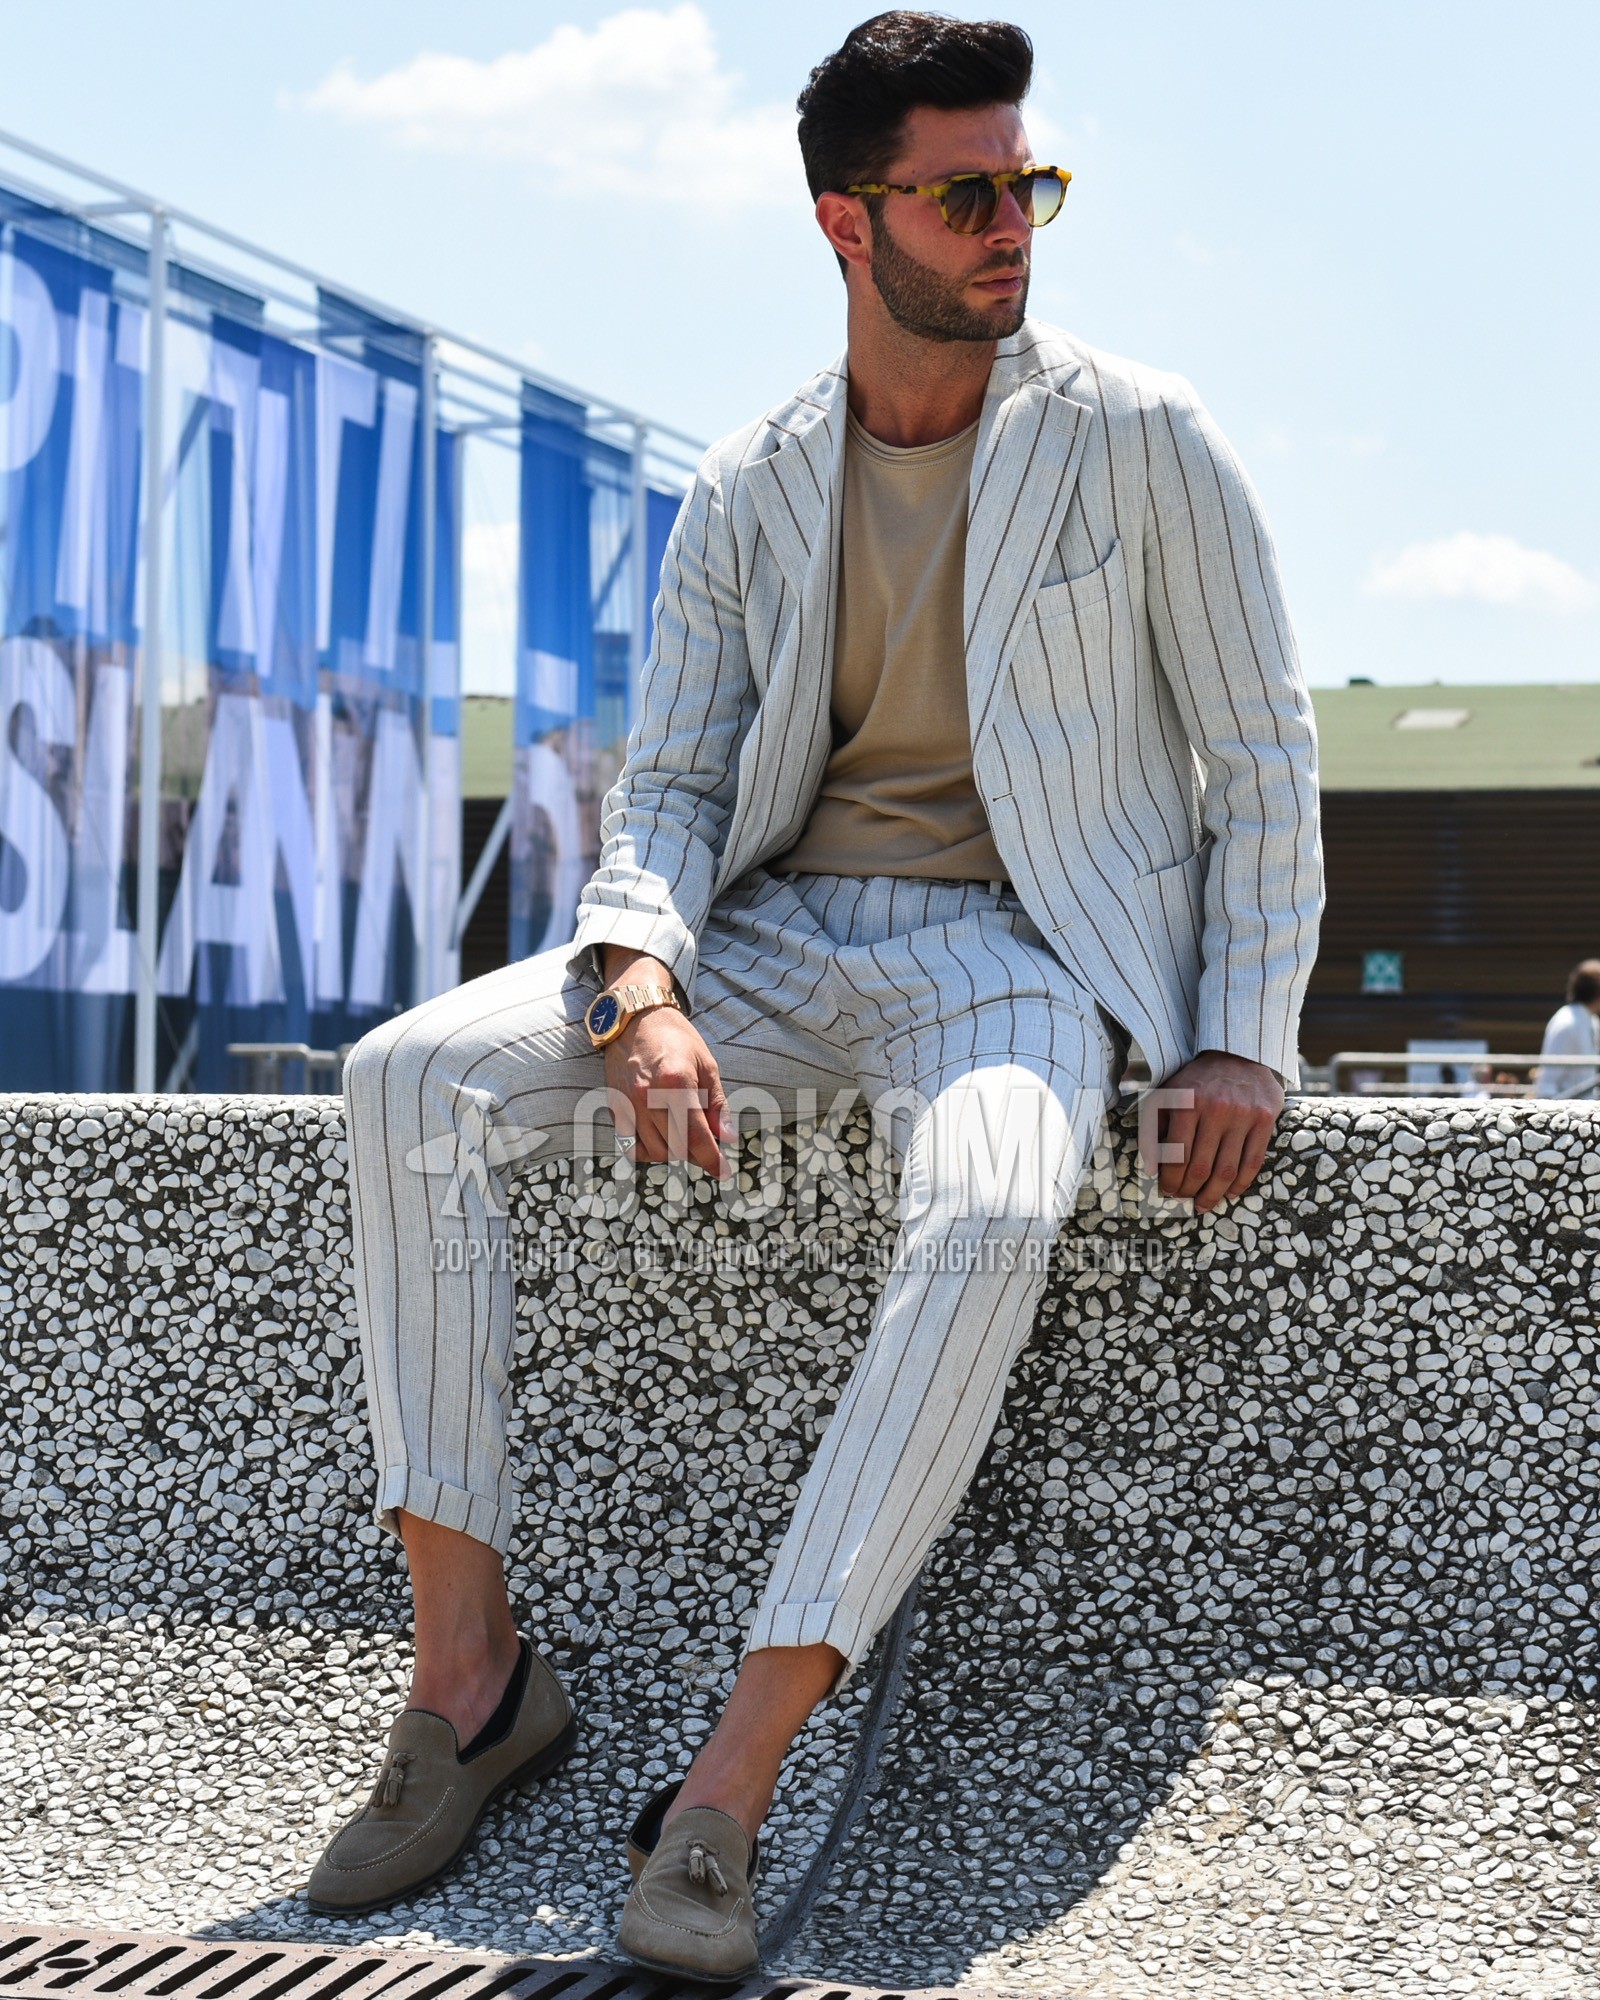 Men's spring summer outfit with yellow tortoiseshell sunglasses, beige plain t-shirt, beige tassel loafers leather shoes, beige suede shoes leather shoes, white stripes suit.